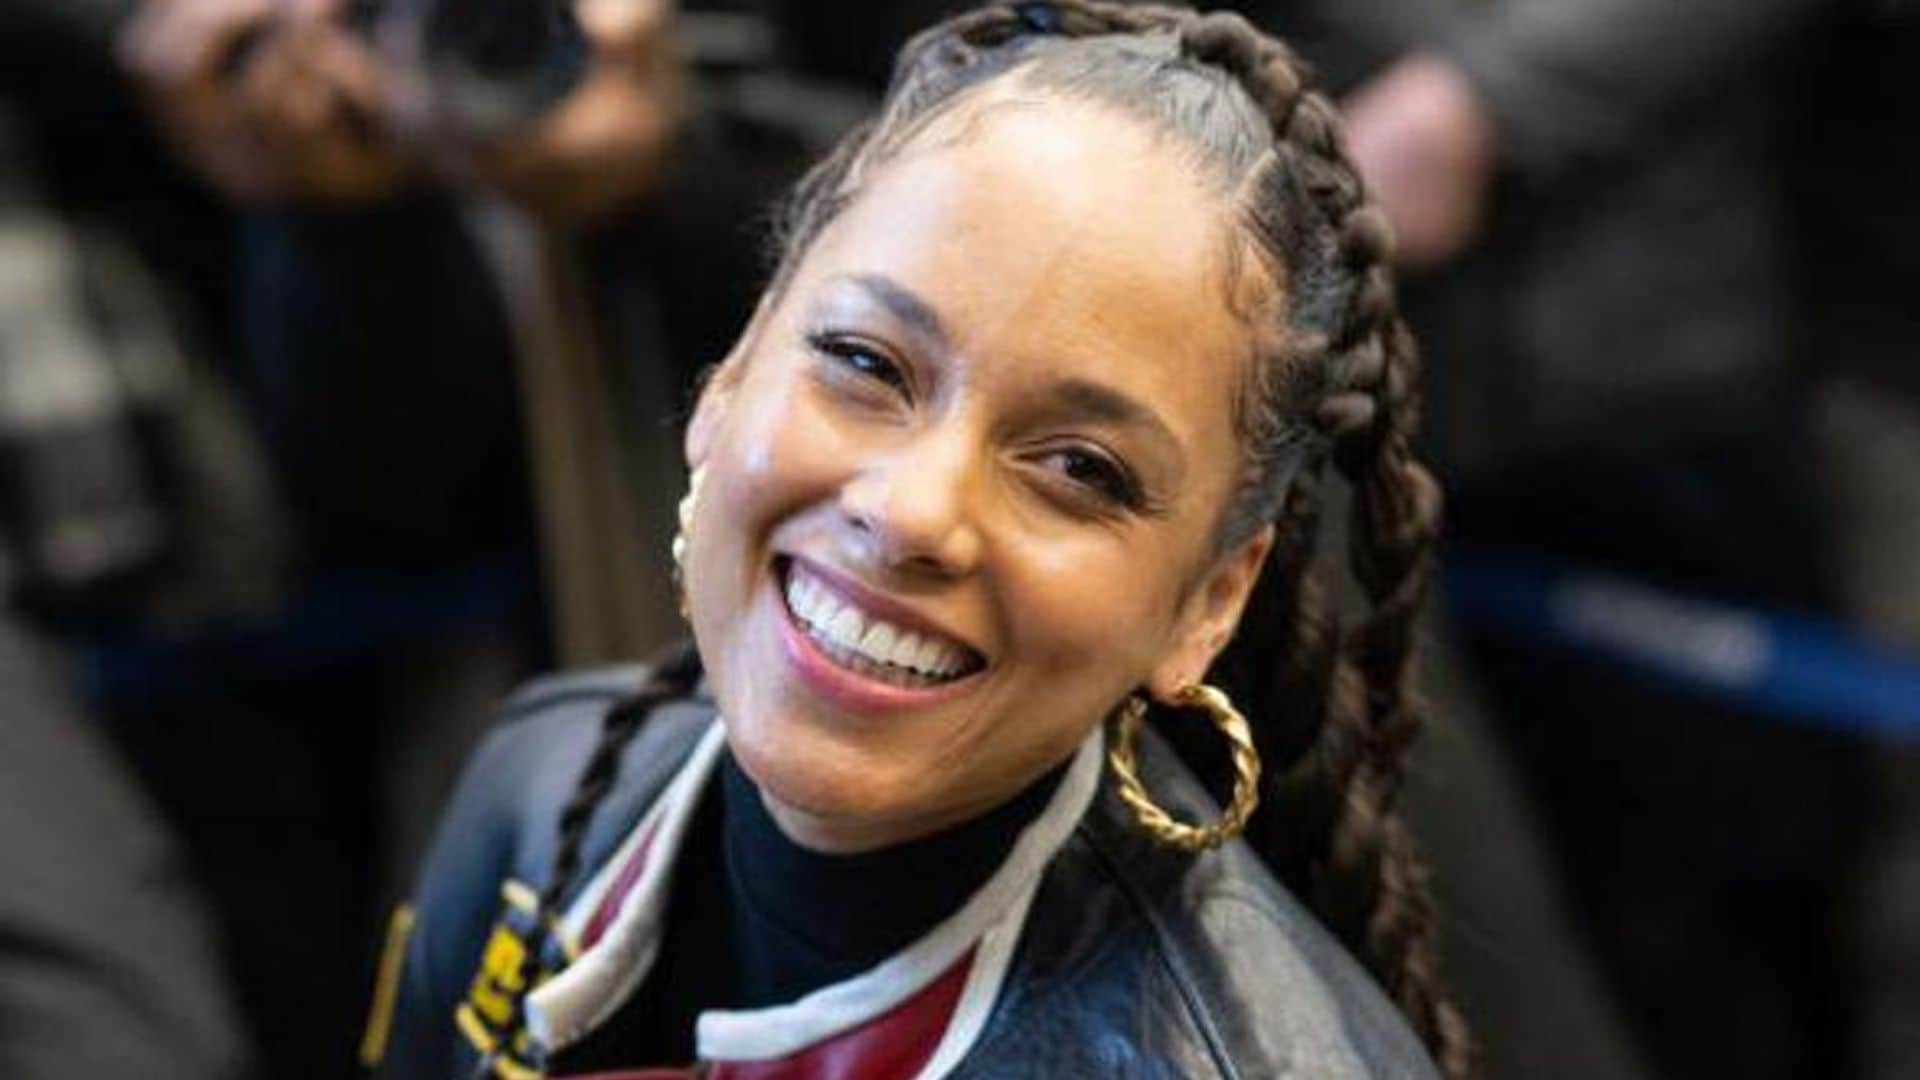 Alicia Keys reminds fans she has an incredible Christmas album with ‘Santa Baby’